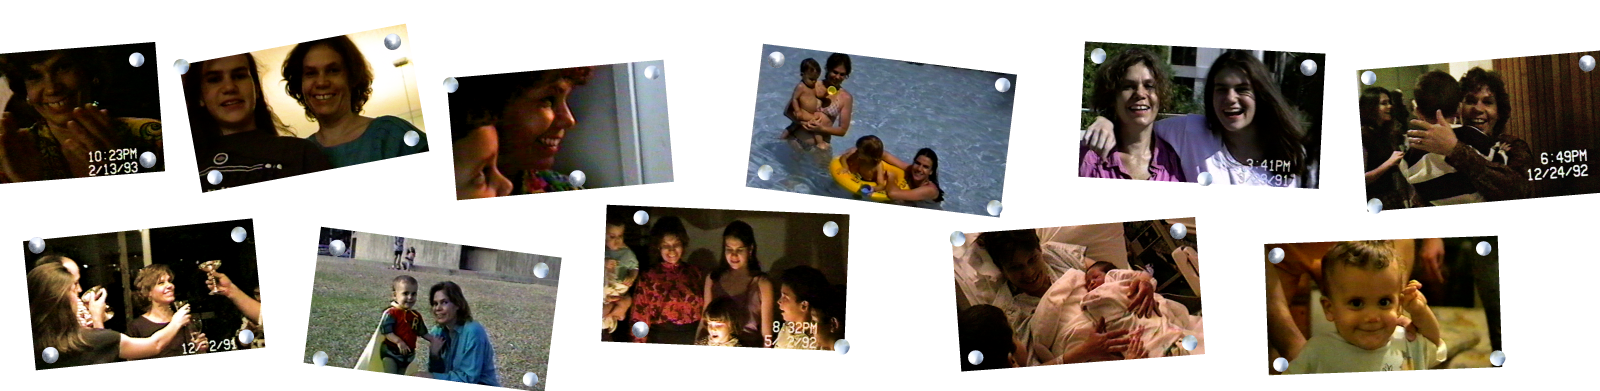 A collage of still image grabs from home videos depict members of Alexandra Hidalgo's family